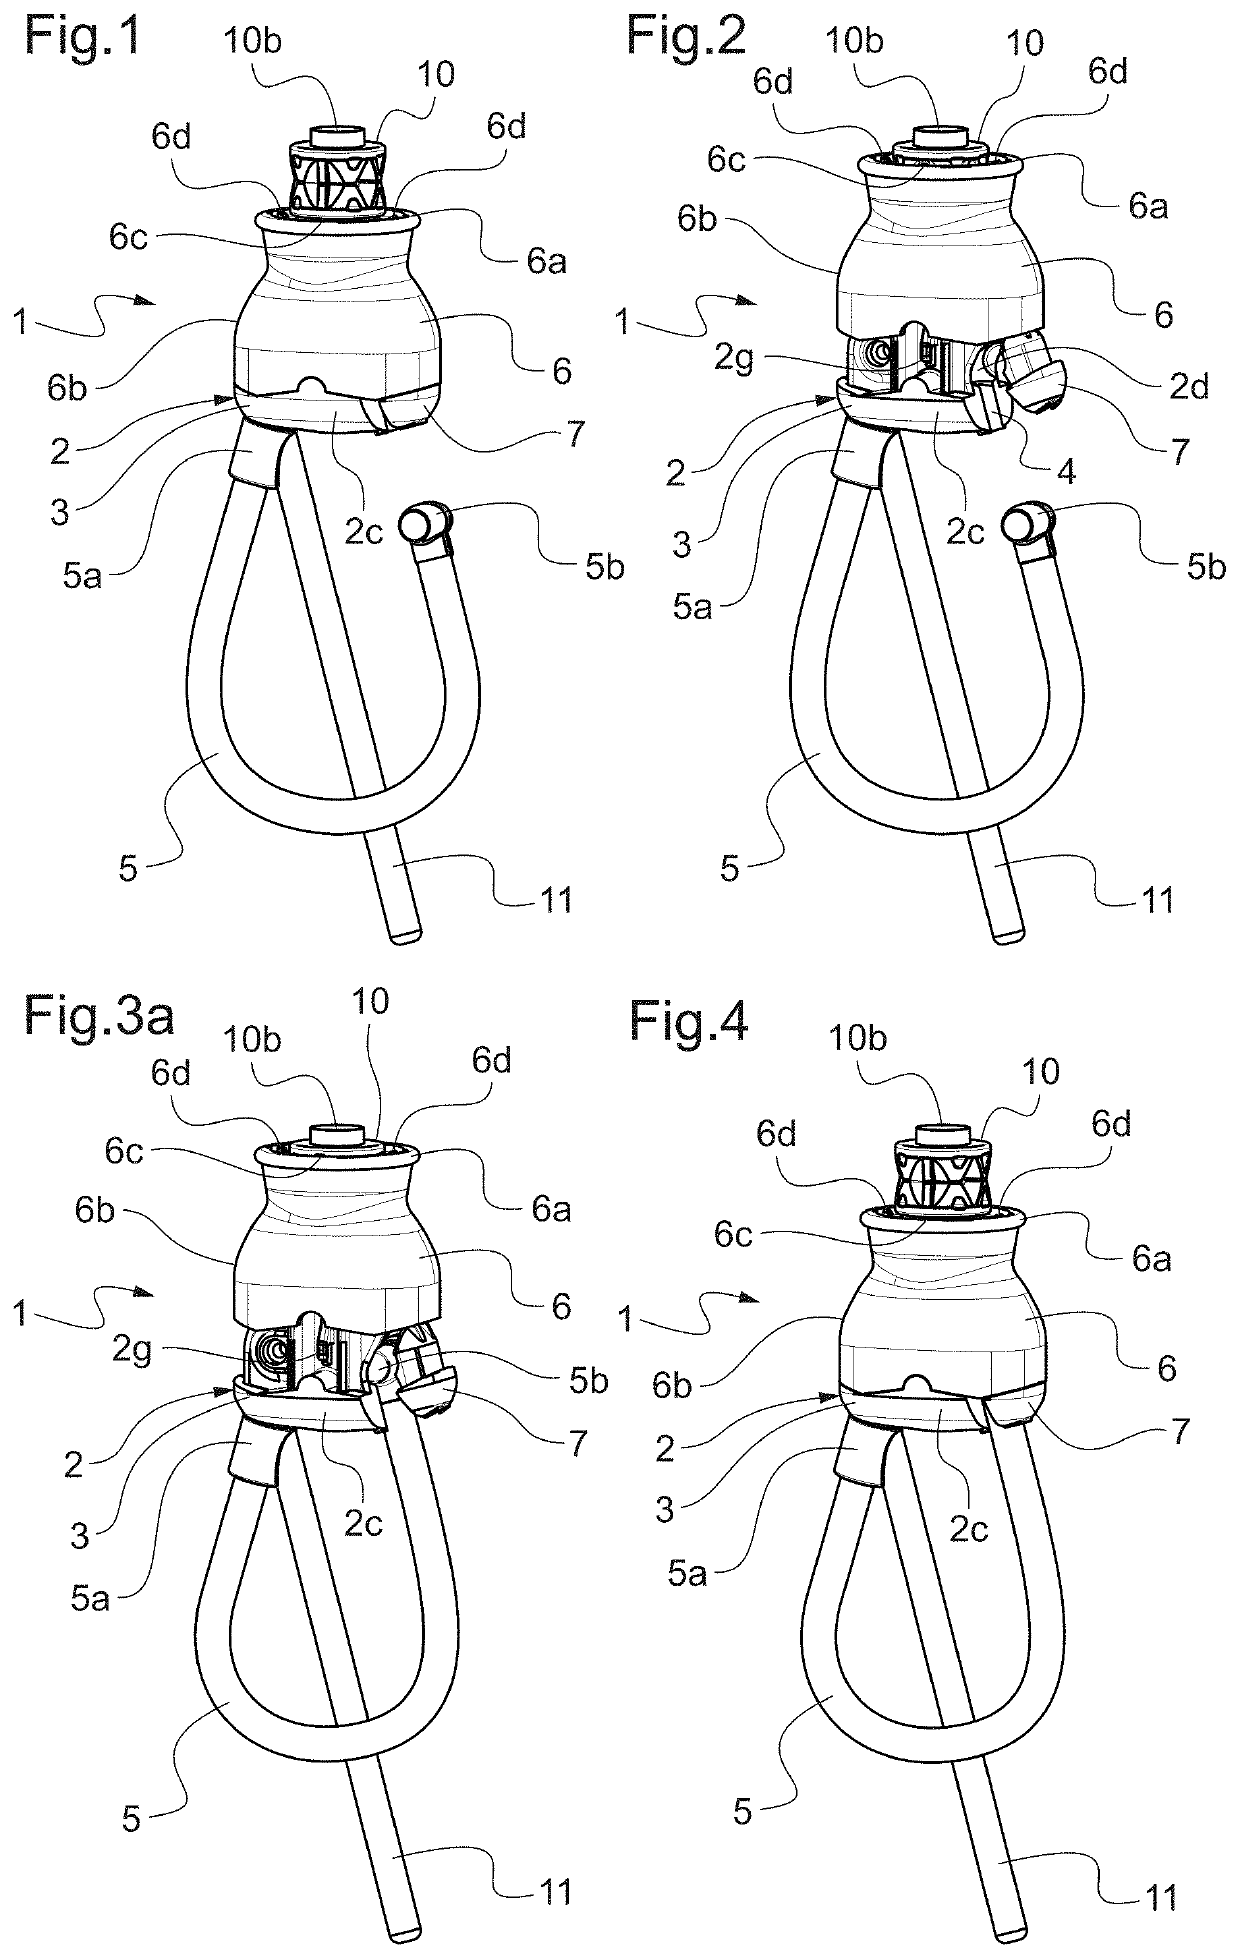 Coupling system, assembly of an equipment rigidly connected to a user and a coupling system and kiteboarding kite bar